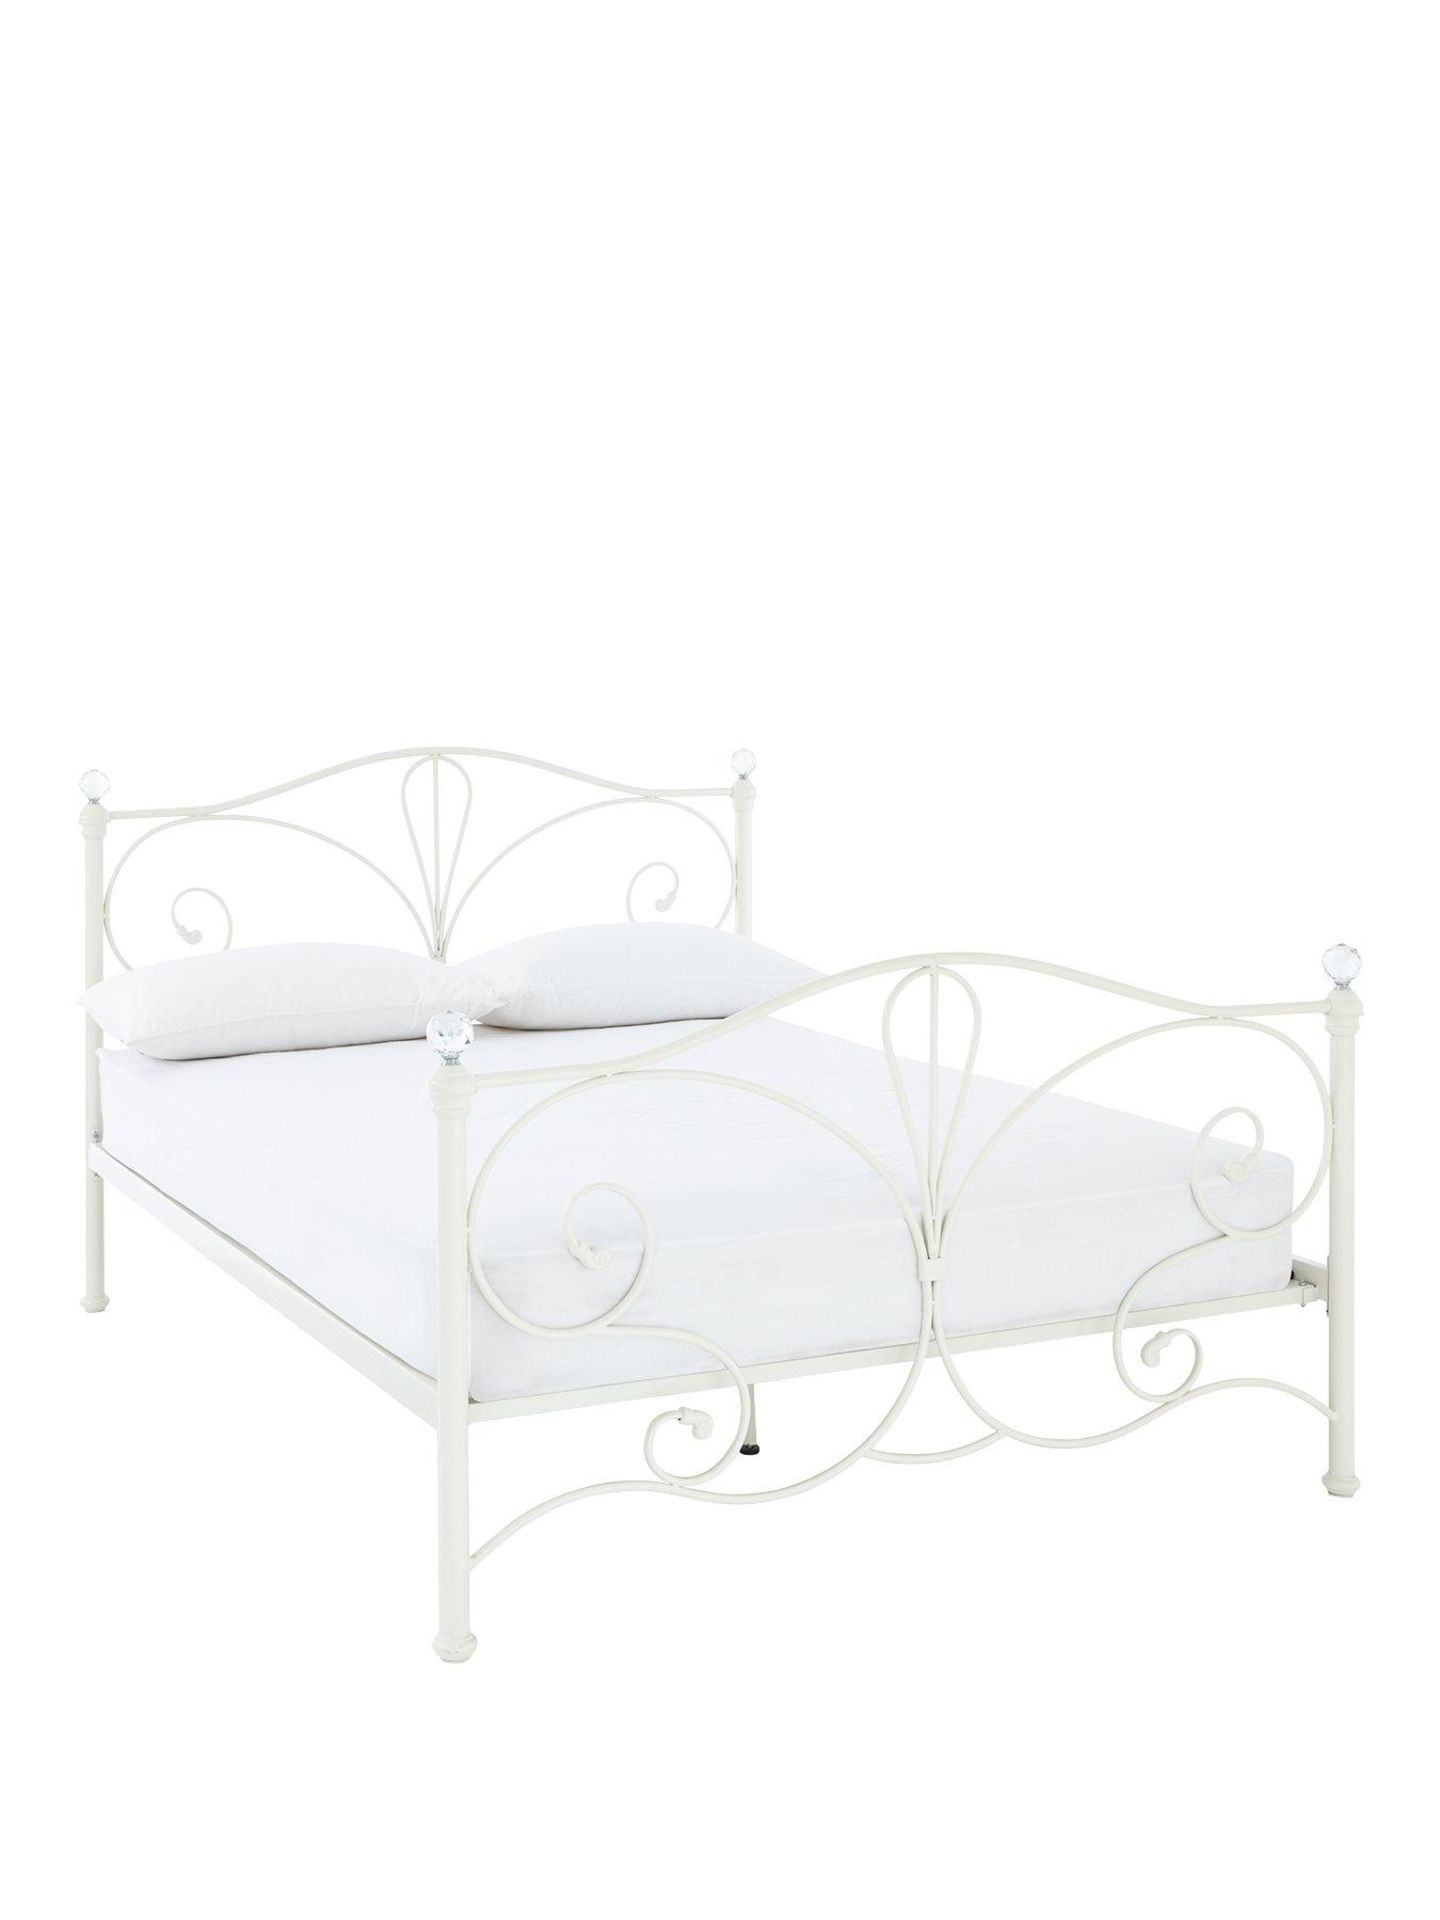 Boxed Item Claremont Double Bed [Ivory] 109X132X204Cm Rrp:£478.0 - Image 2 of 2